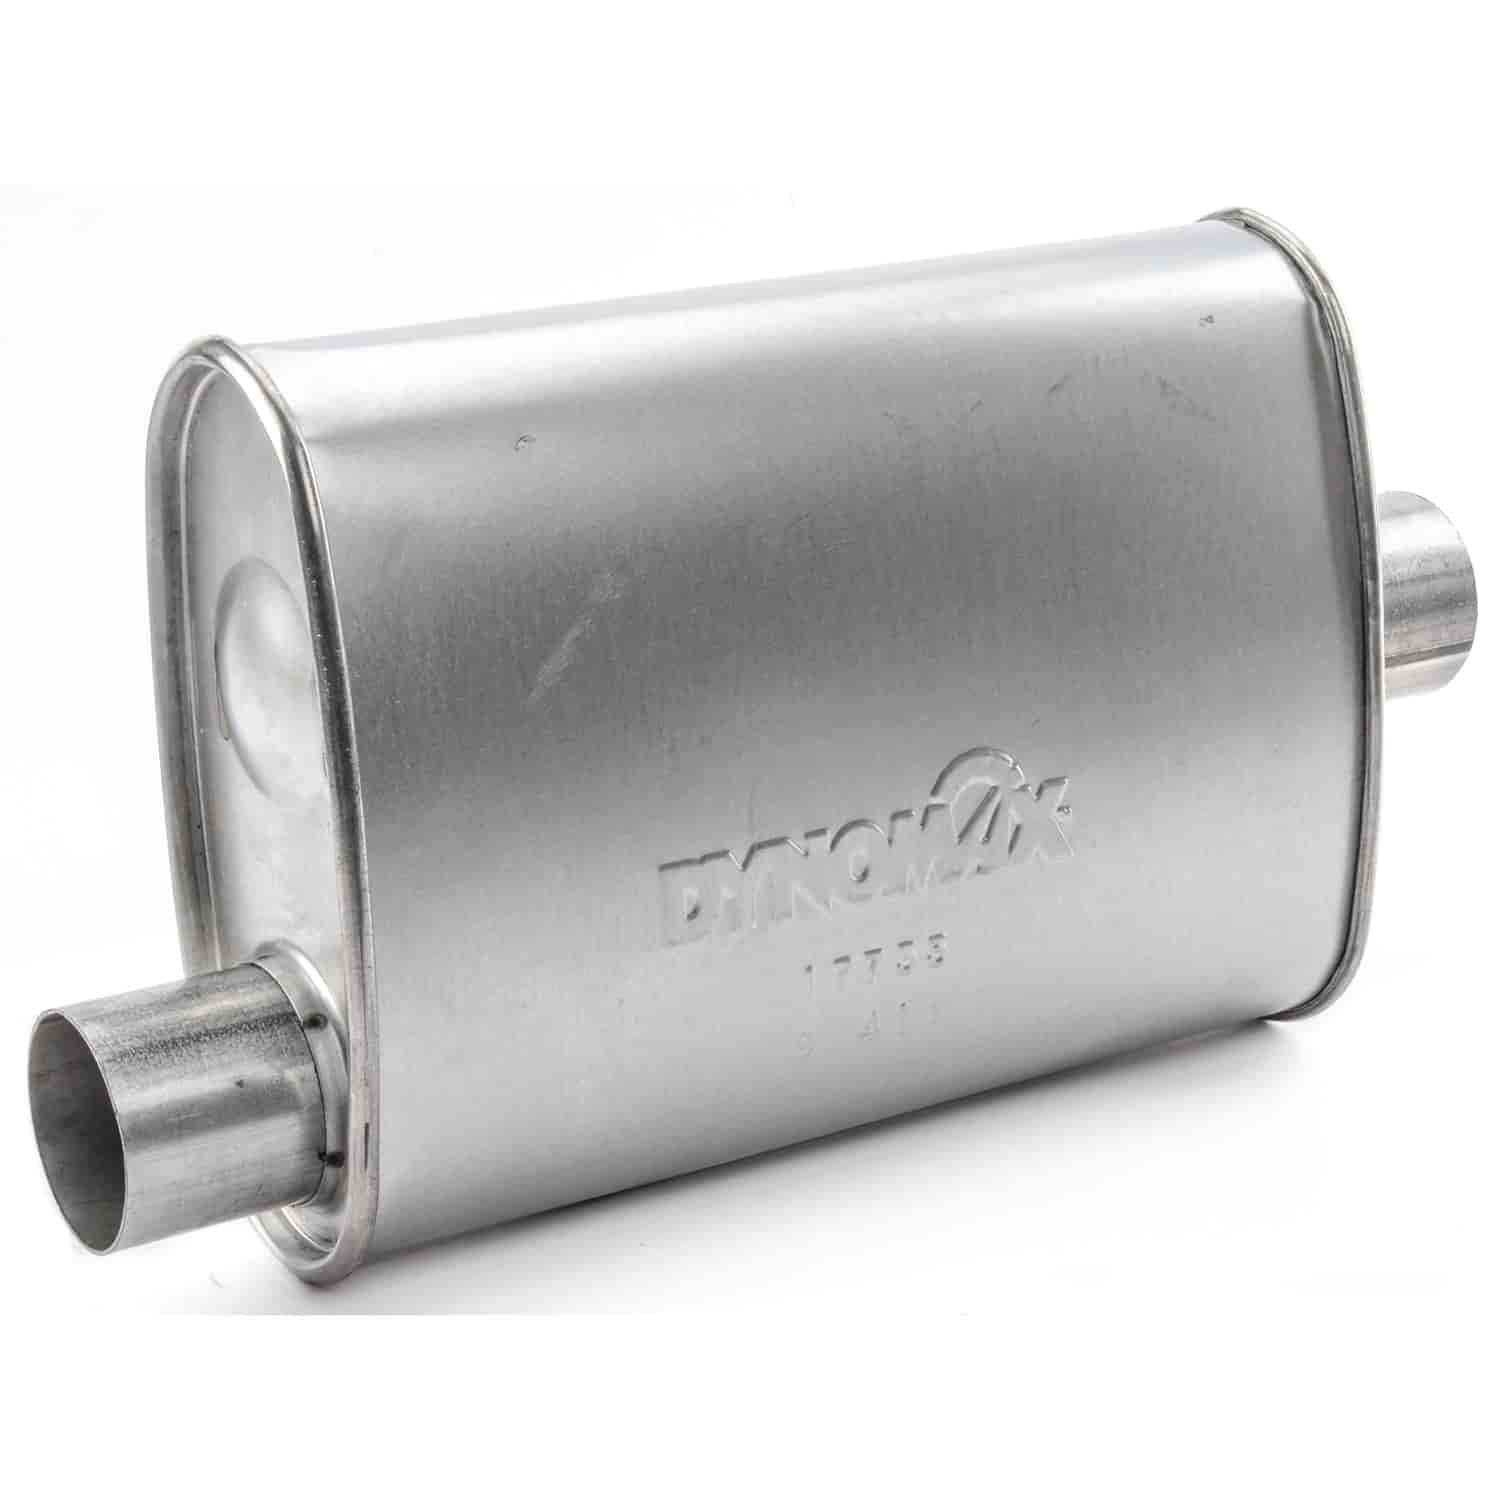 Super Turbo Muffler In/Out: 2.50"